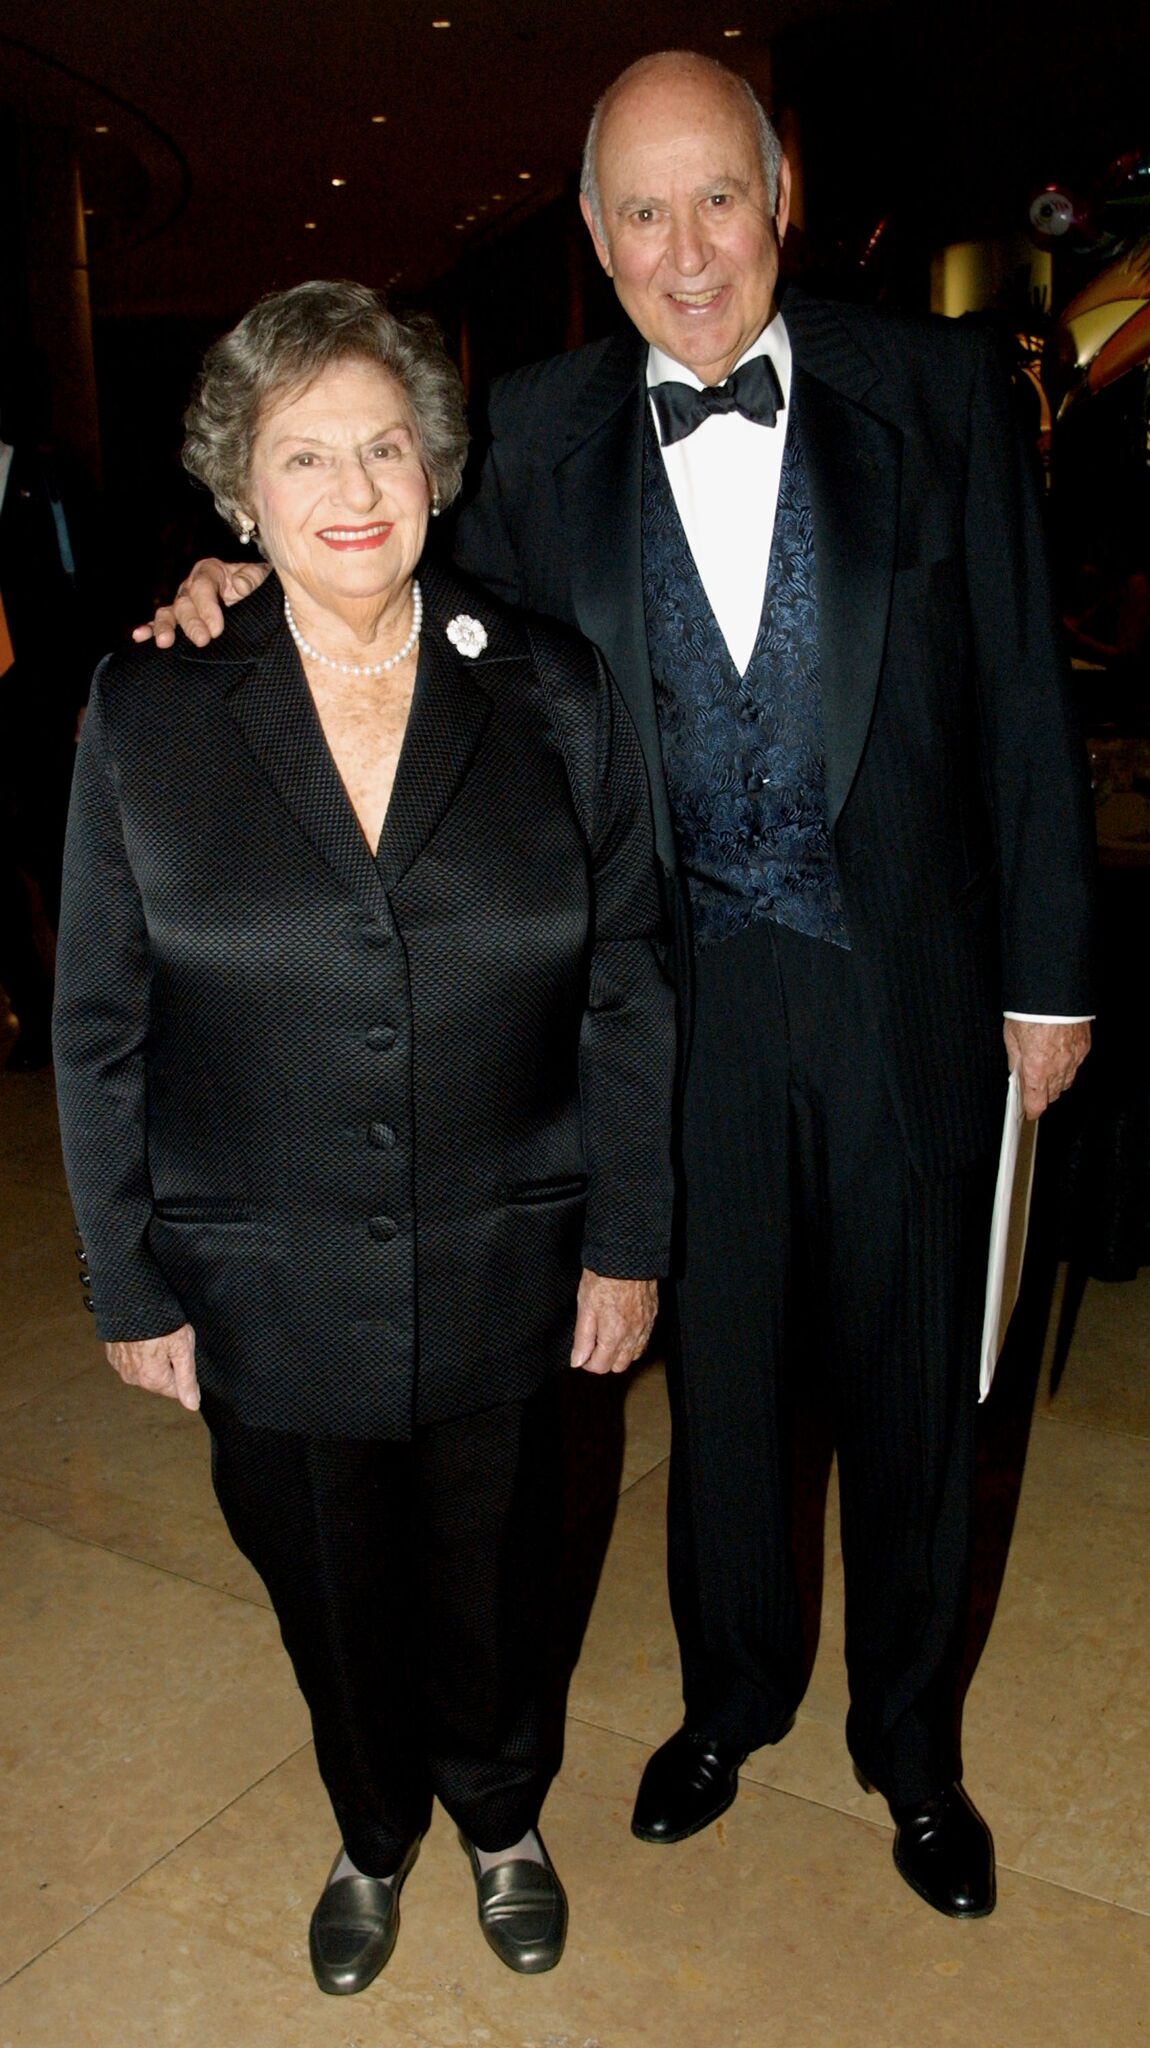  Carl Reiner and his wife Estelle attend the Young Musicians Foundation 4th Annual UNA Festival De Gala LatinoAmericana Benefit  | Getty Images